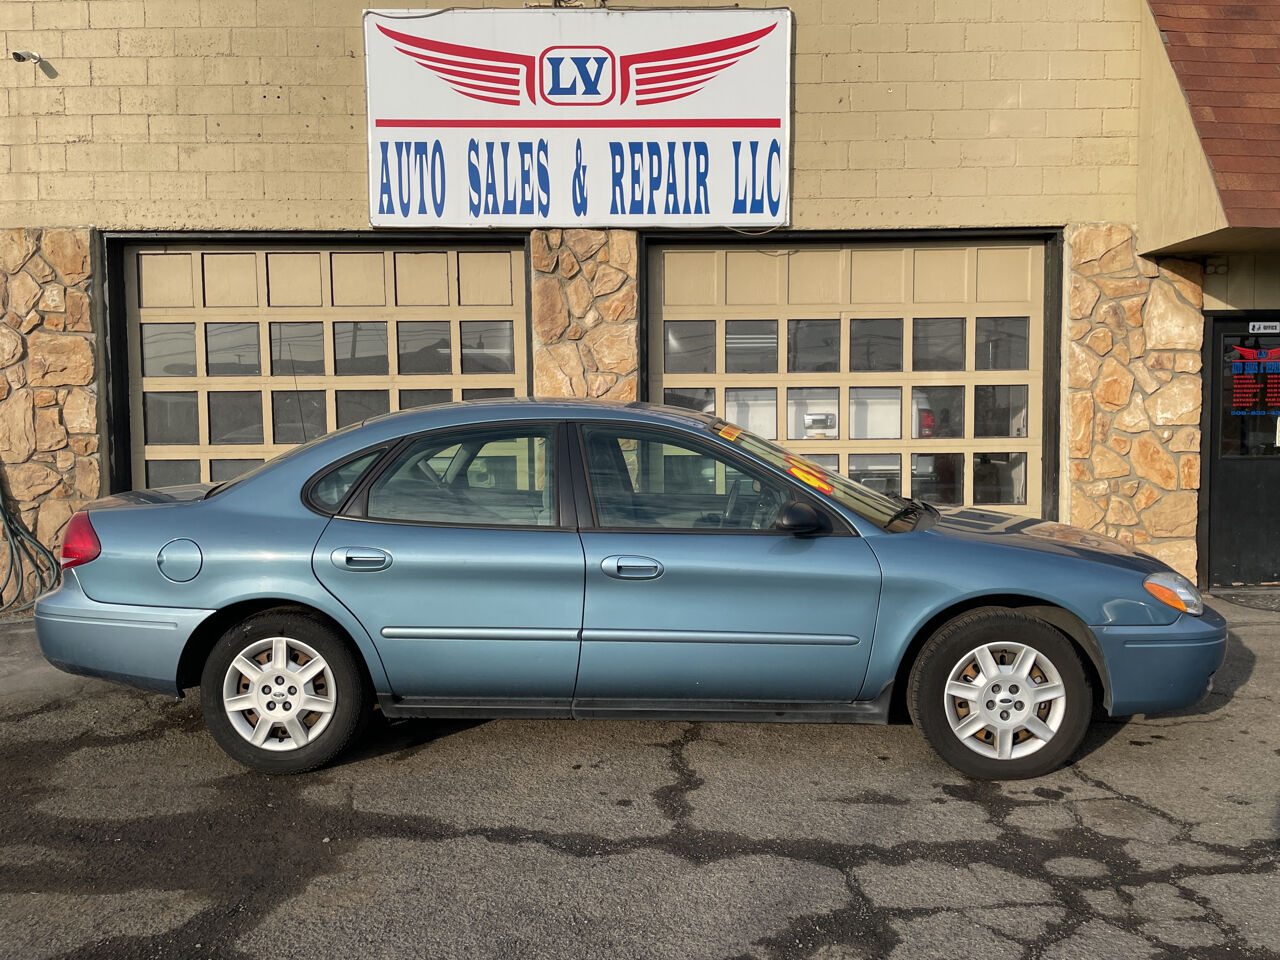 2007 Ford Taurus For Sale In Waltham, MA - Carsforsale.com®